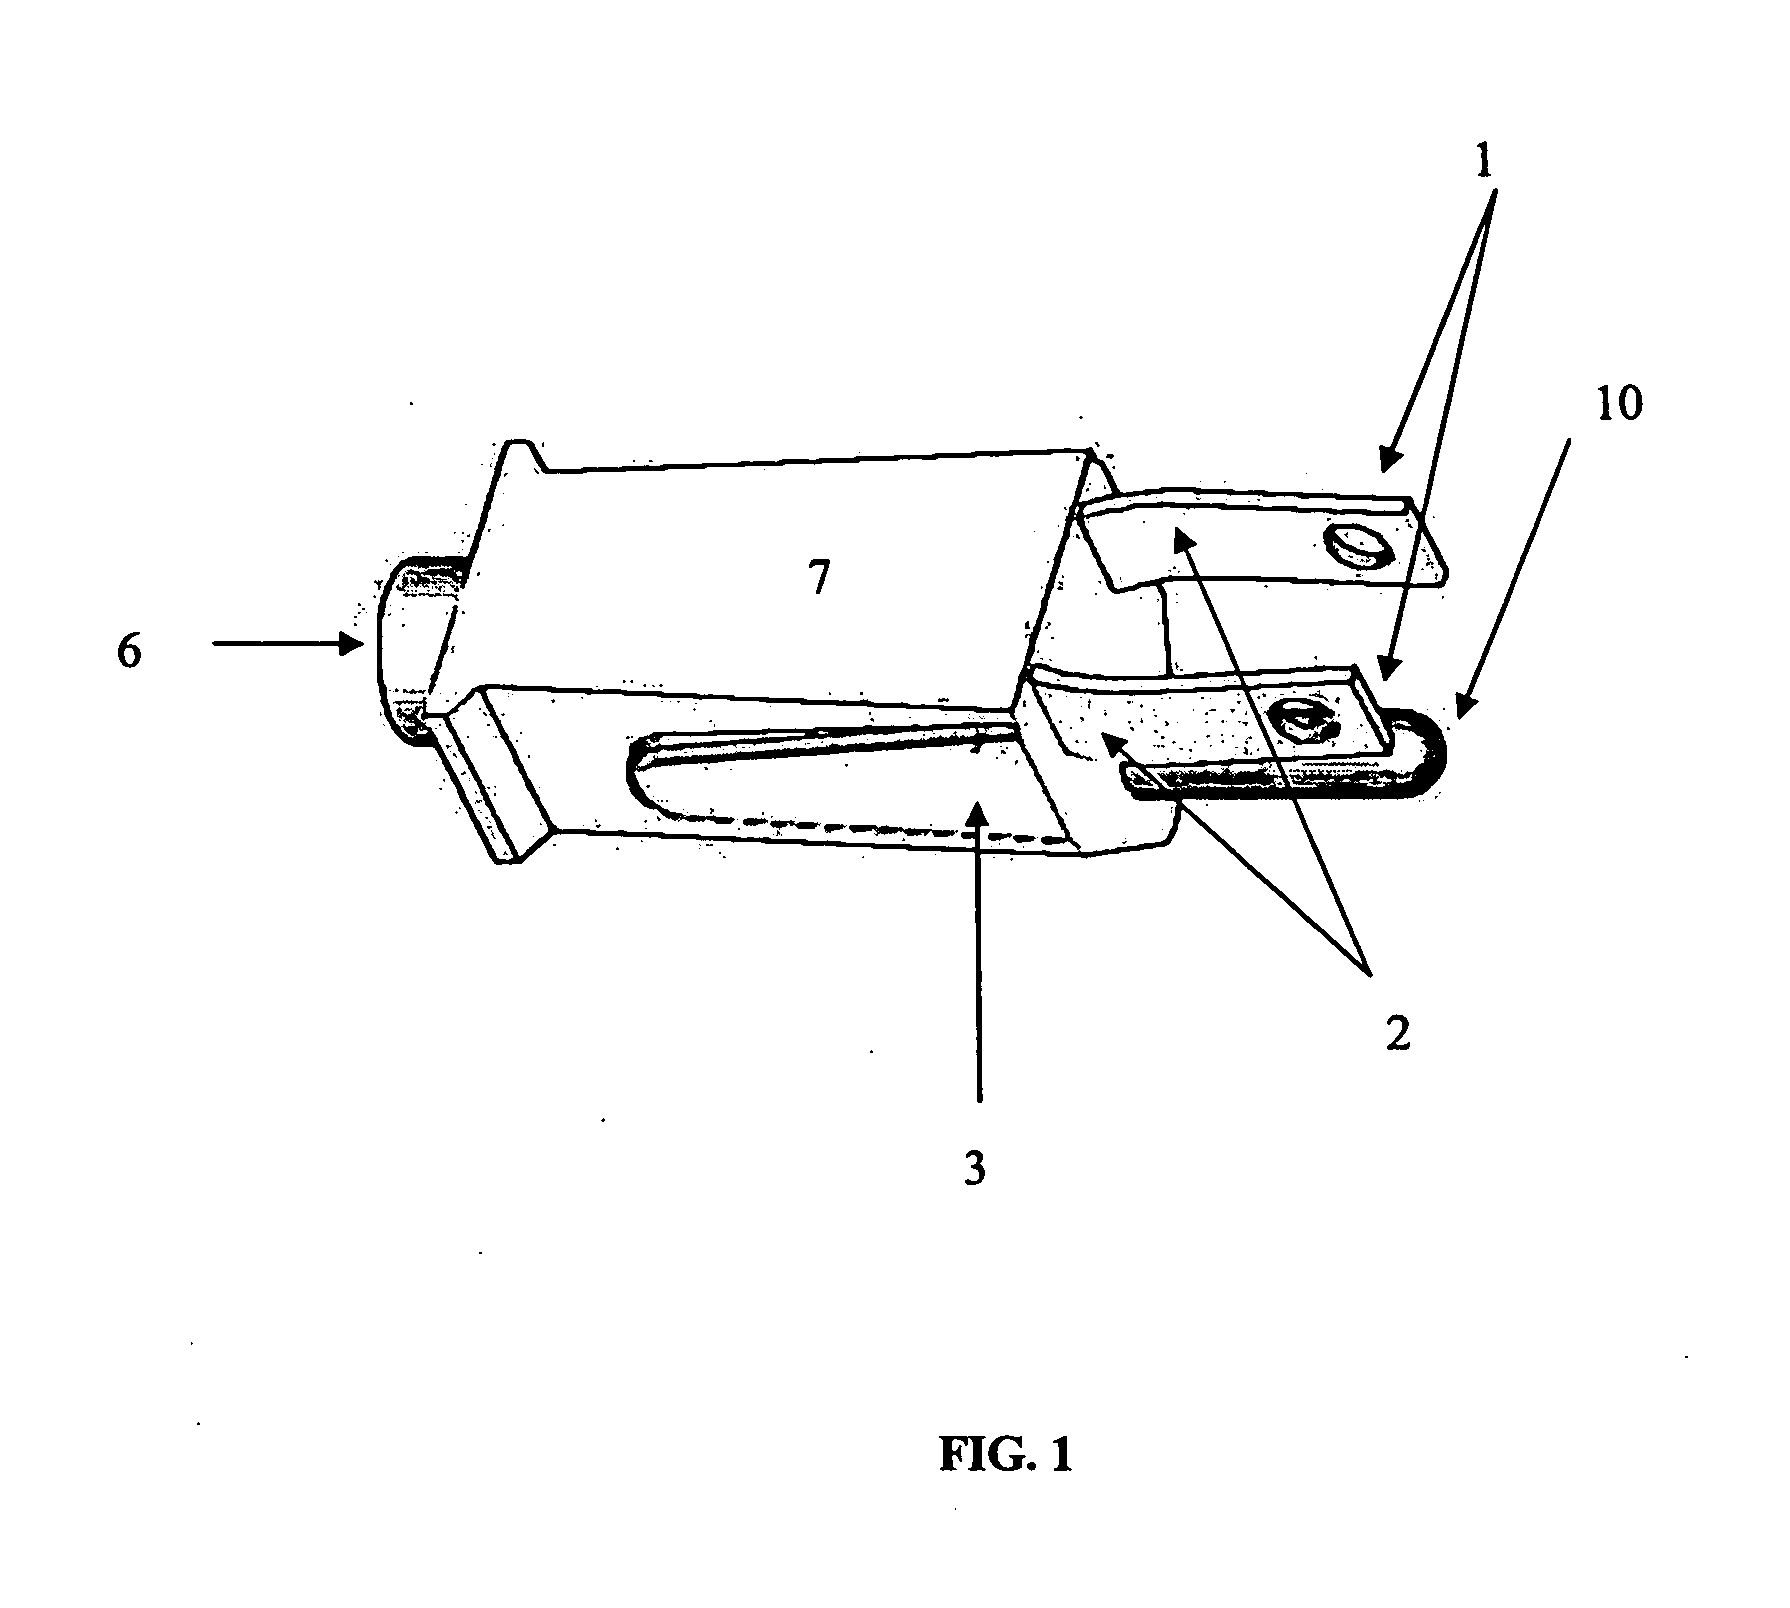 Plug for avoiding unintended disconnection of electrical power